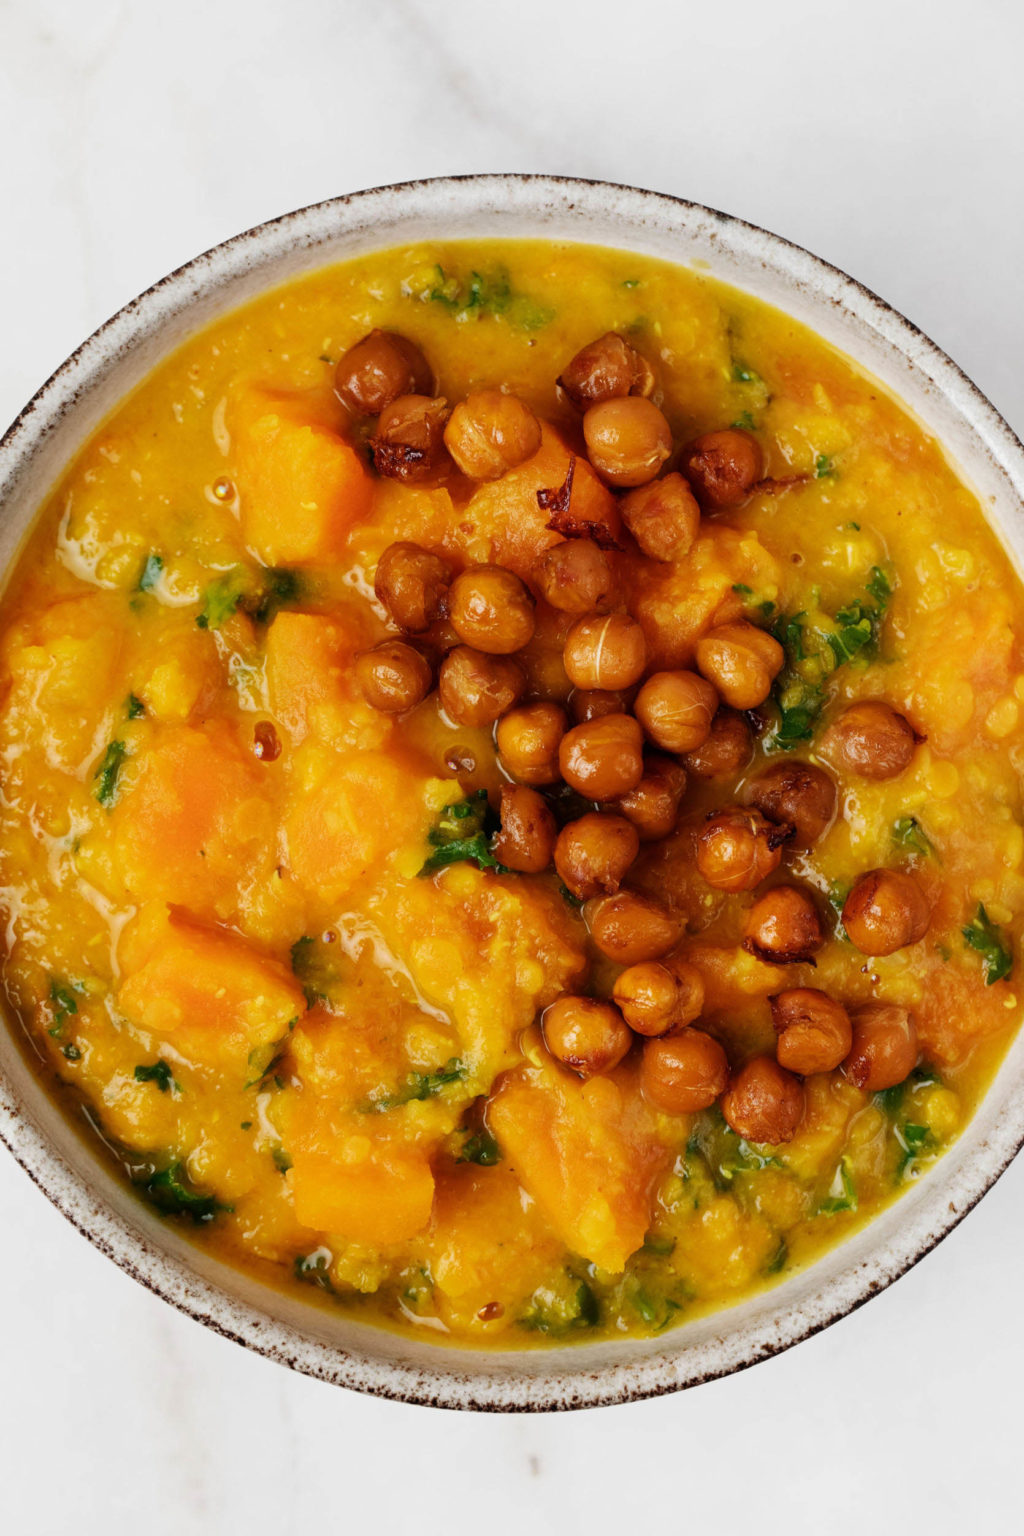 A zoomed in image of crispy chickpeas, which have been used to top a bowl of stewed vegetables and legumes.